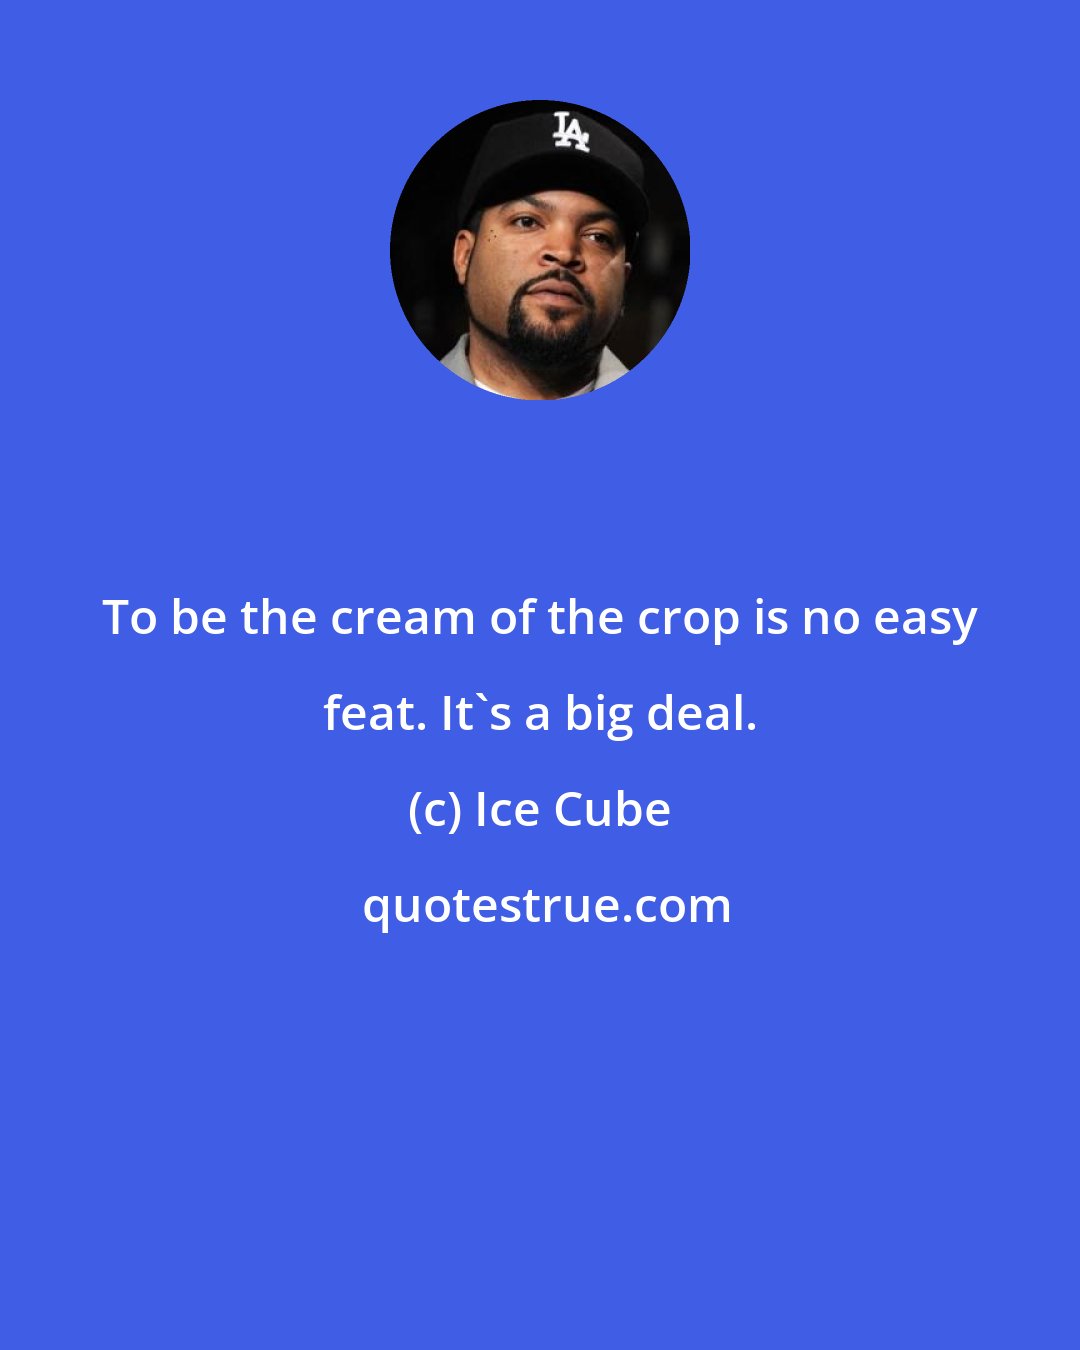 Ice Cube: To be the cream of the crop is no easy feat. It's a big deal.